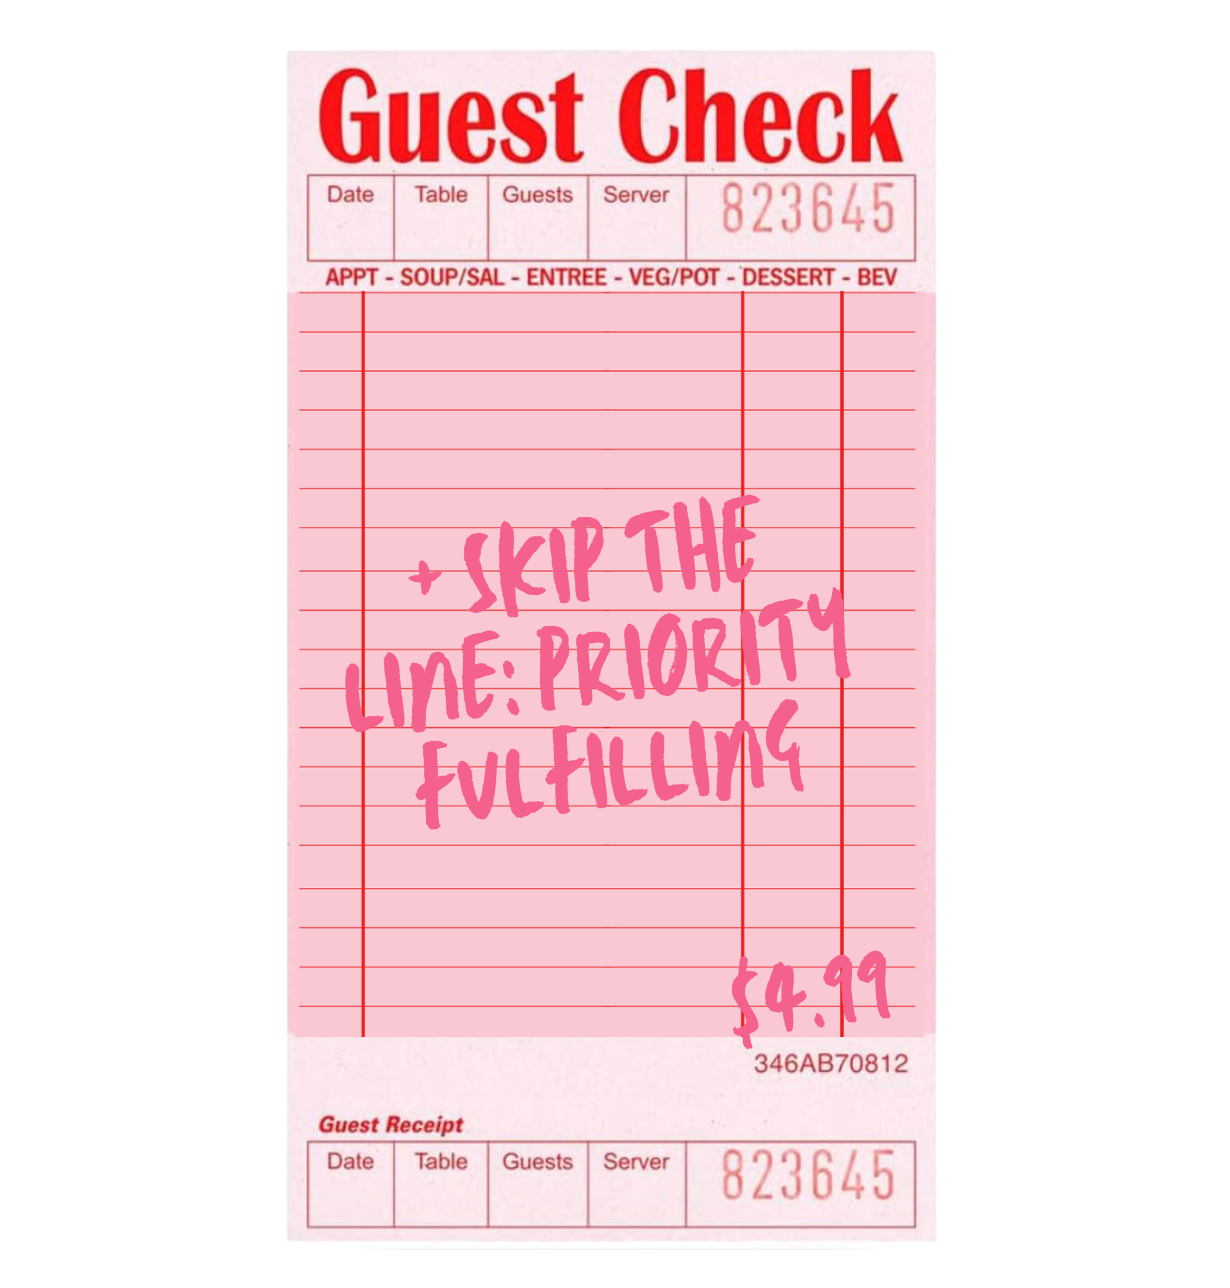 Skip the Line: Get Priority Fulfillment